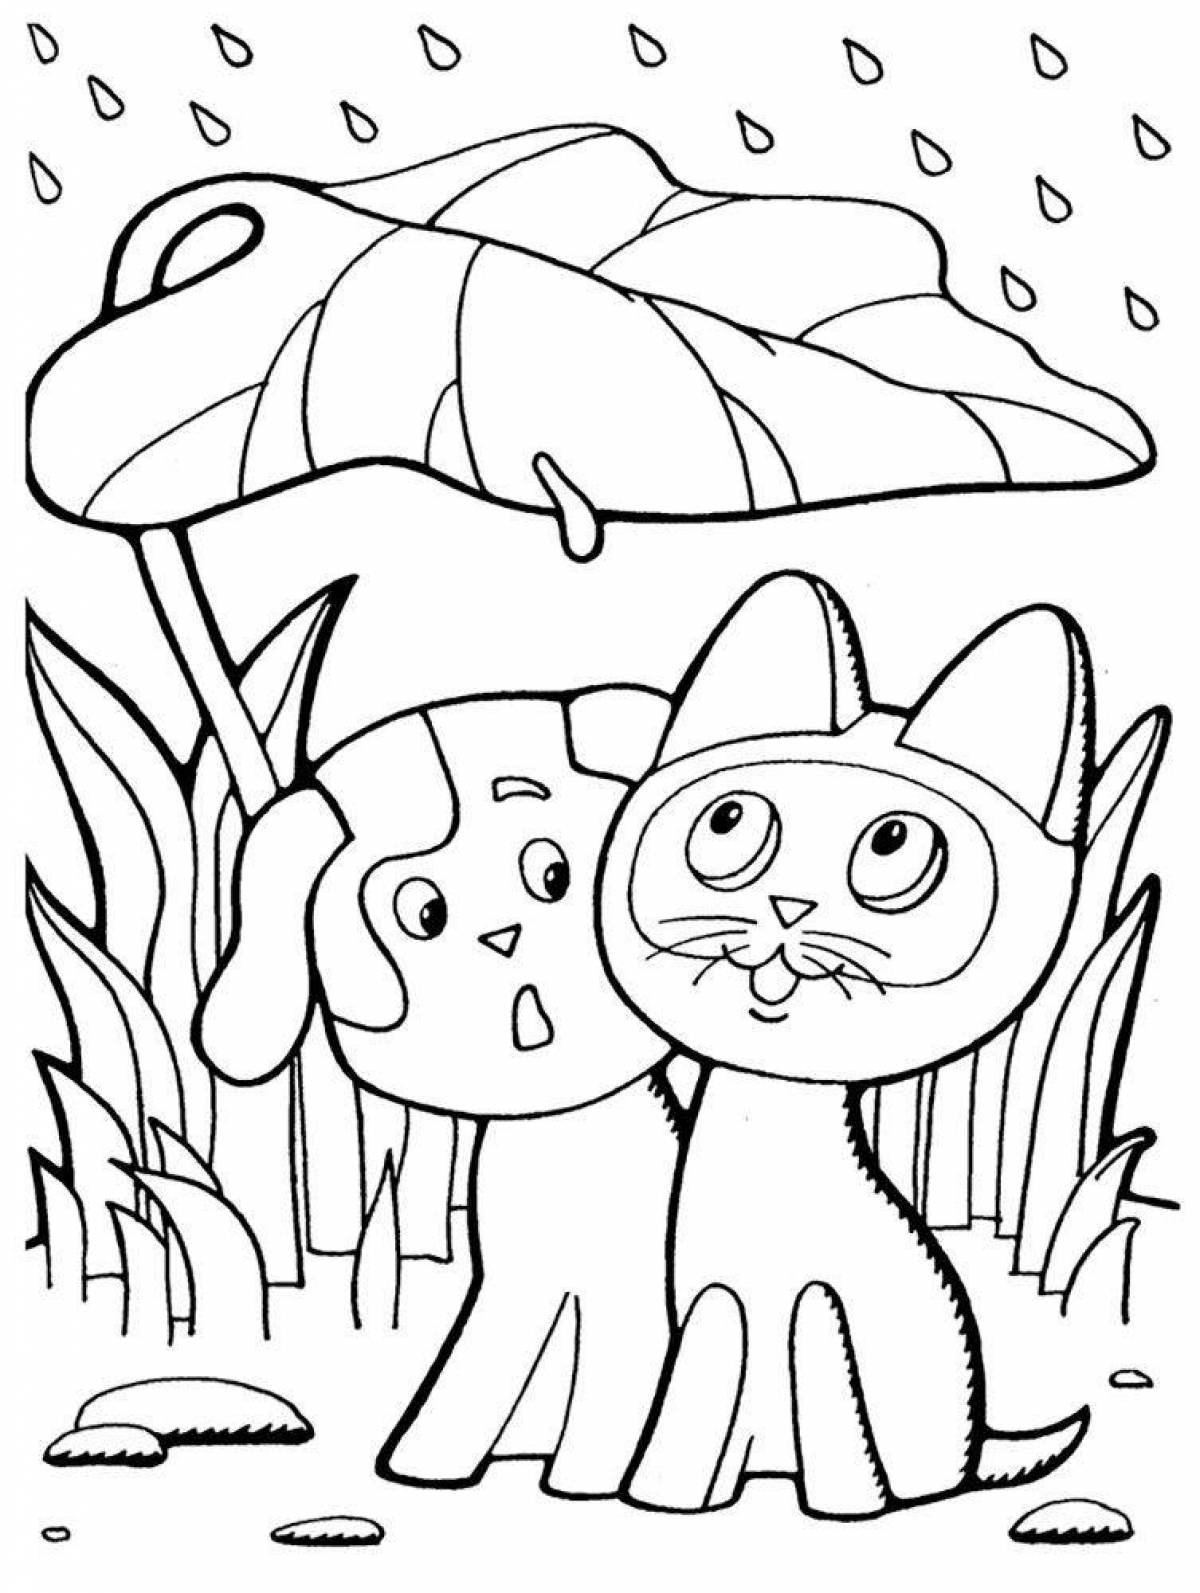 Coloring book funny kitten